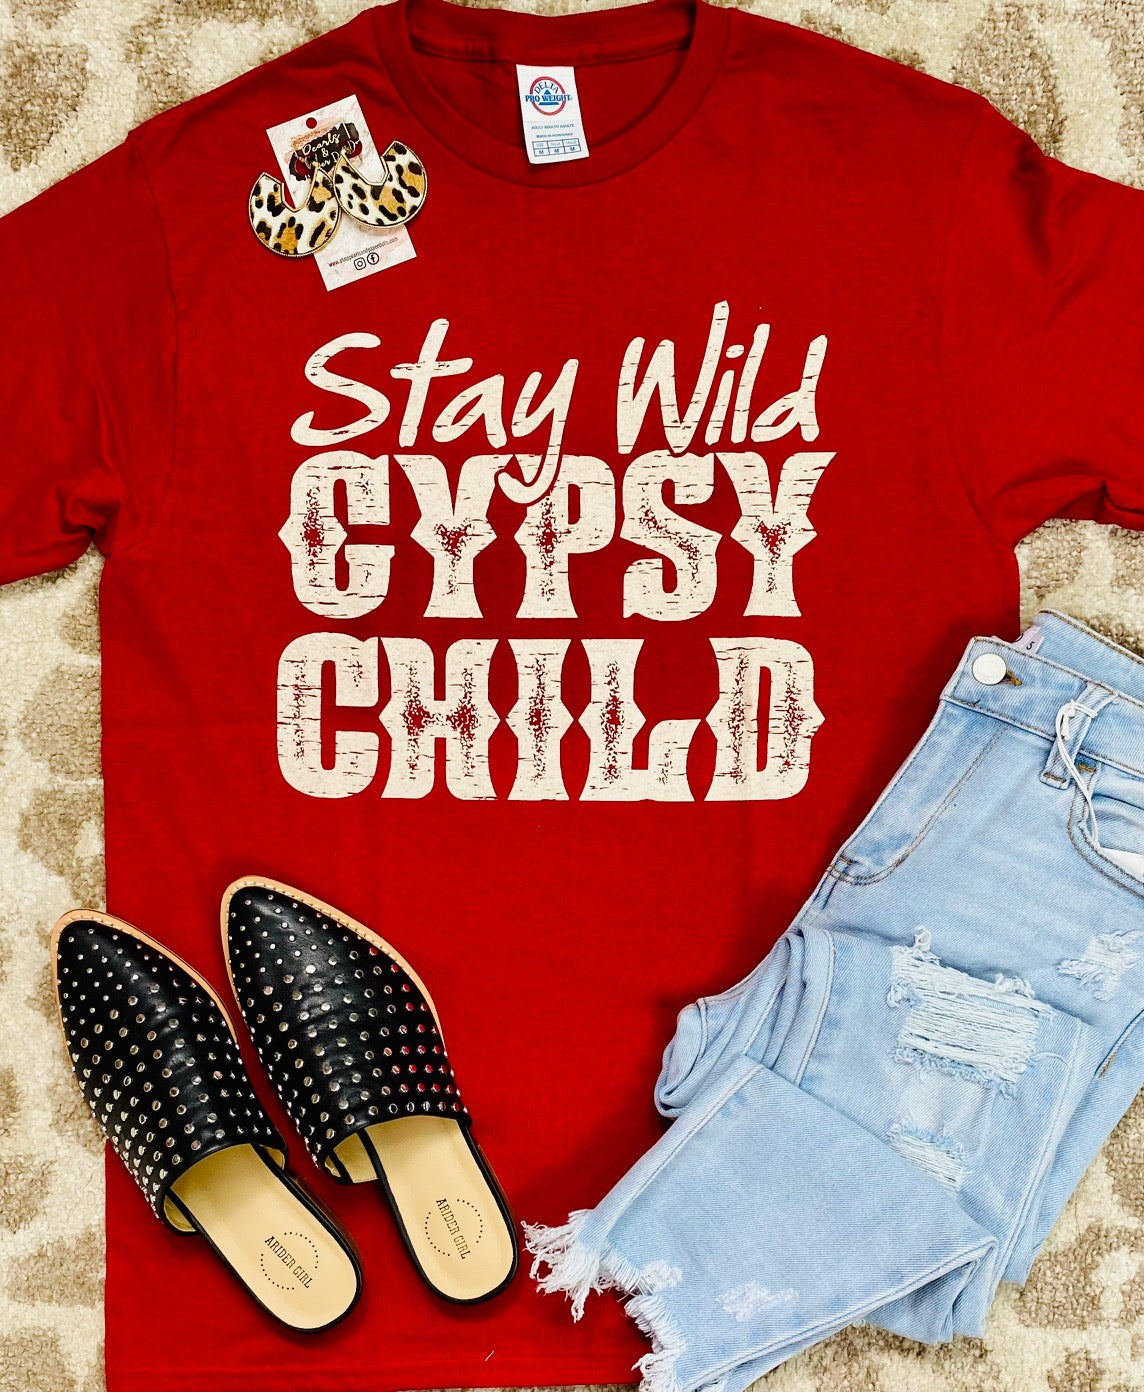 Stay Wild Gypsy Child - graphic tee